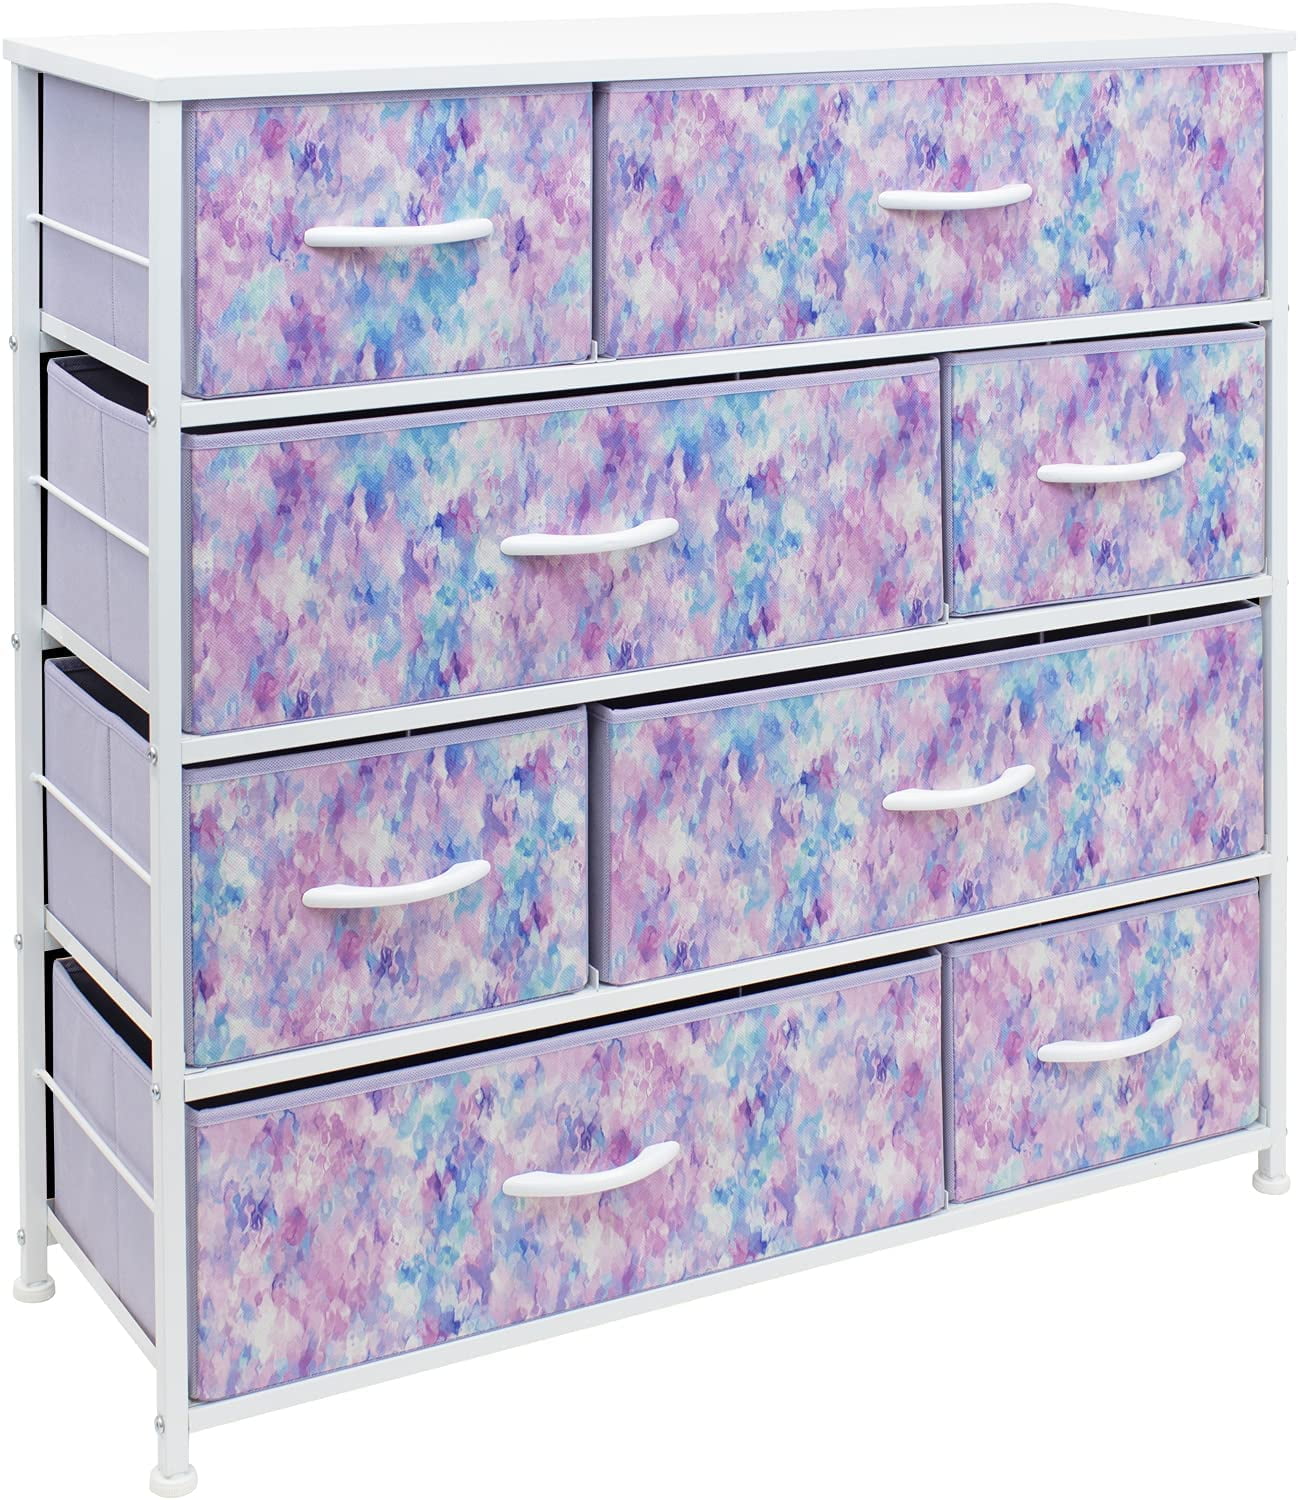 Colourful Square Storage Unit6 Fabric Bins Removable DrawersPink & Purple 